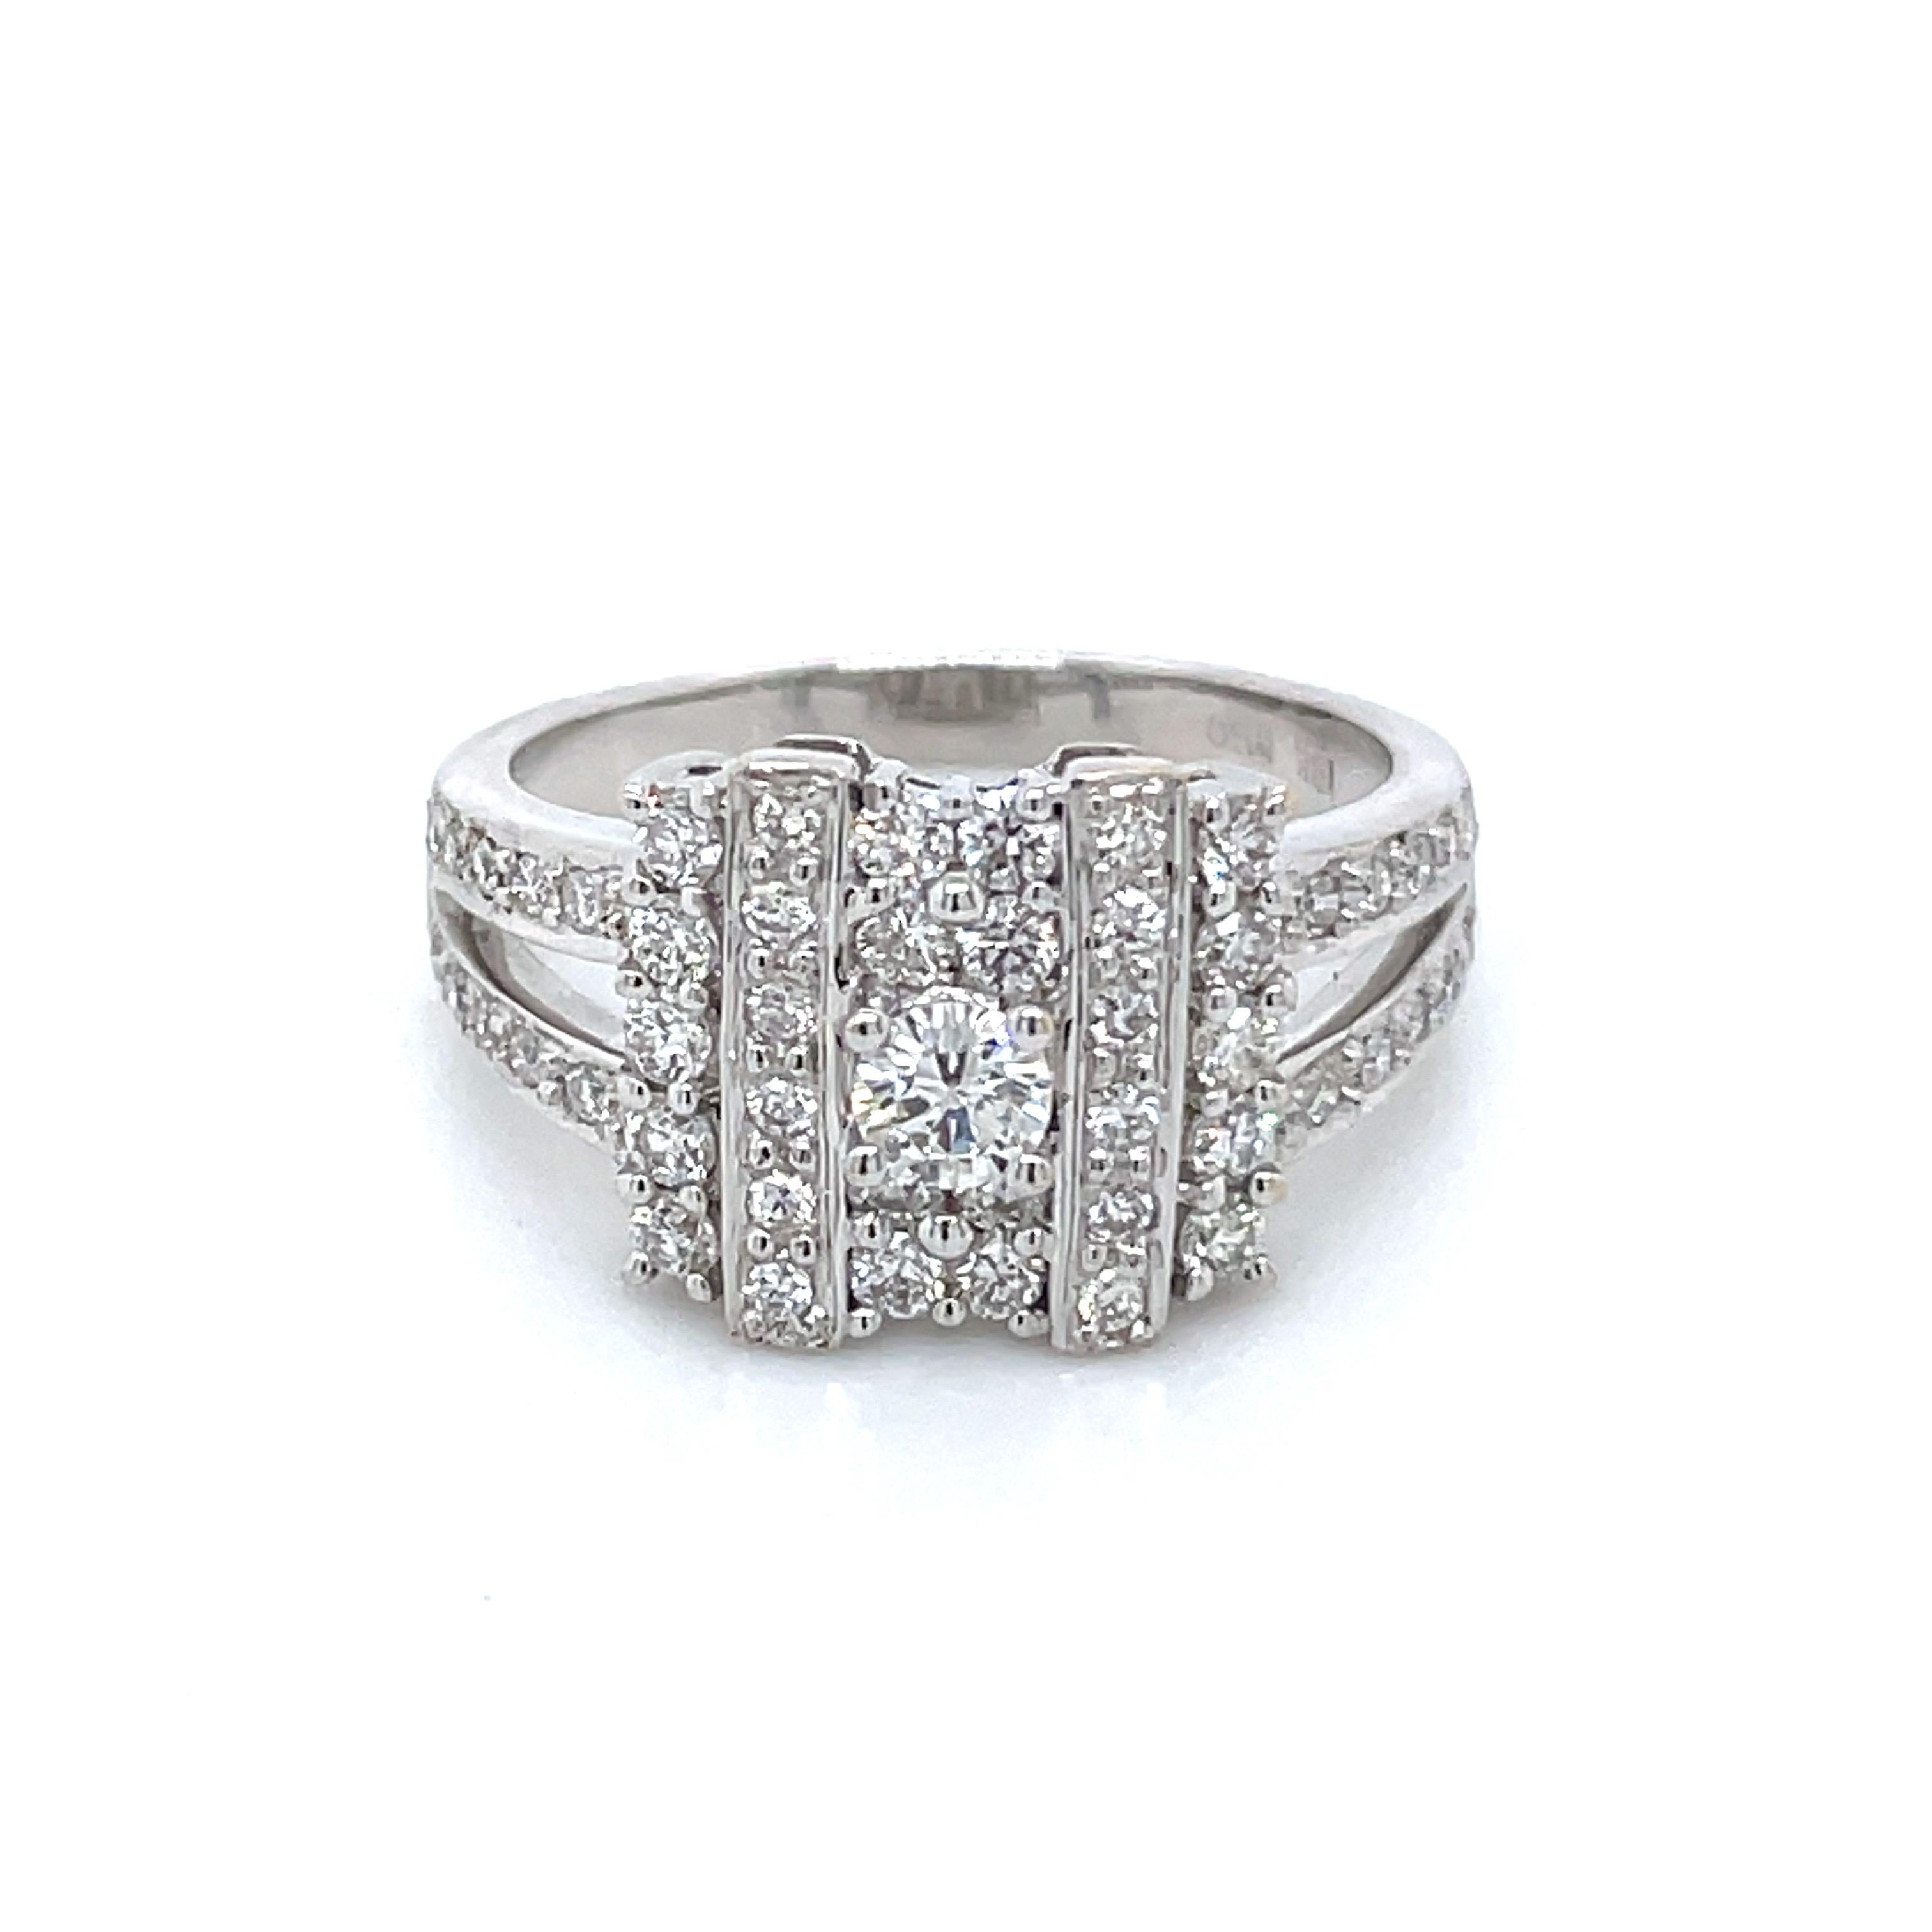 At the heart of this exquisite piece sits a magnificent 0.18-carat round diamond, flanked by two vertical rows of diamonds, creating an enchanting visual appeal. 

This ring features a captivating display of diamonds totaling 0.88 carats, comprising